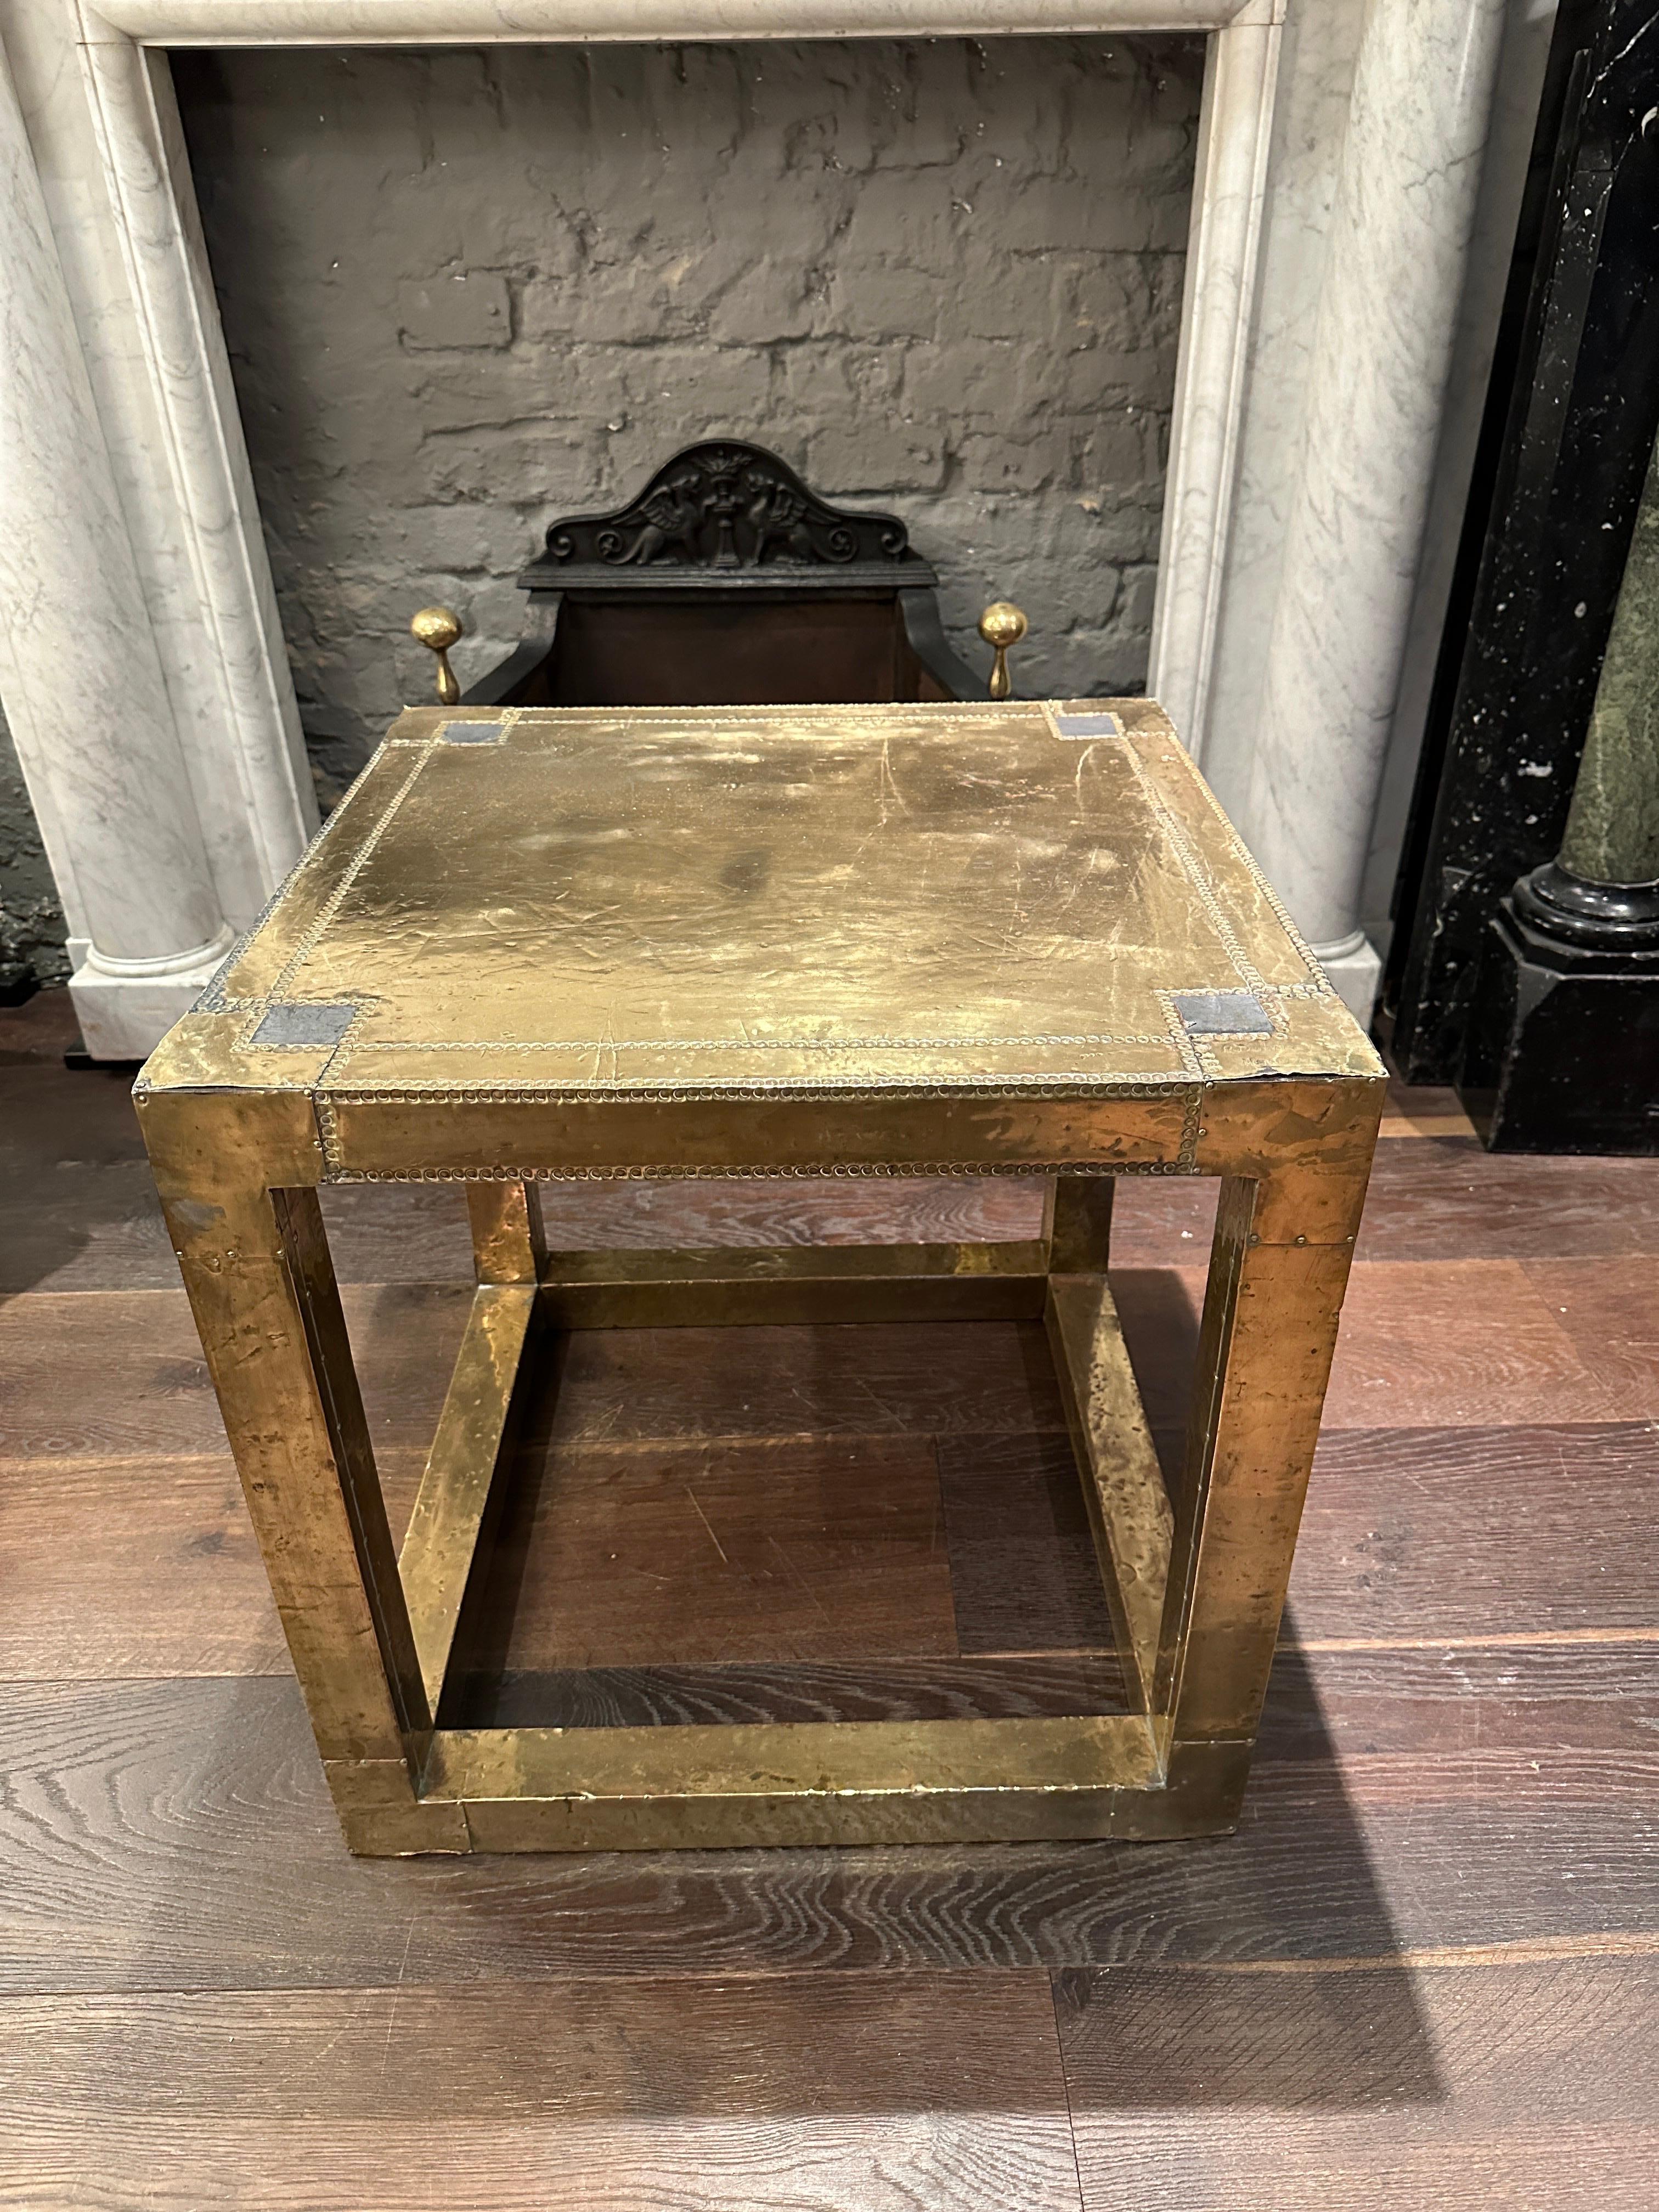 A Brass cubed end, side or coffee table in beaten riveted brass. Open sided, good usable size and aged worn patina. Signed by the Artist R Dubarry Marbella 